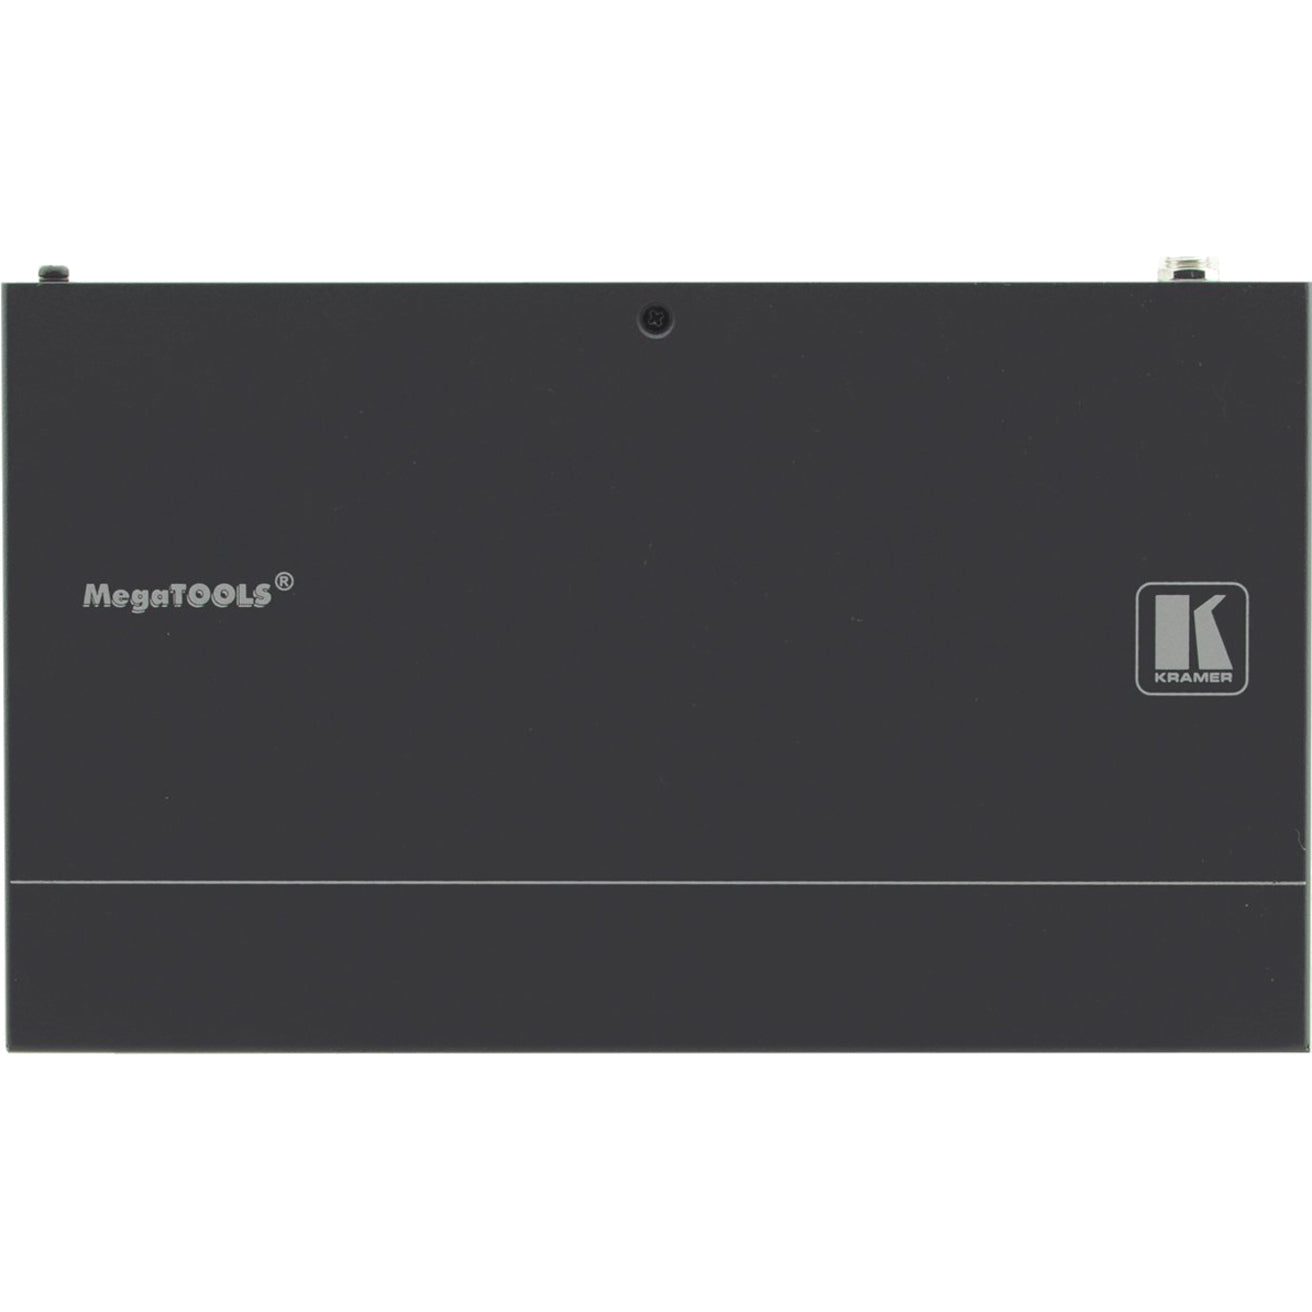 Kramer 4K60 4:2:0 H.264 Video Encoder supporting PoE and Video Wall